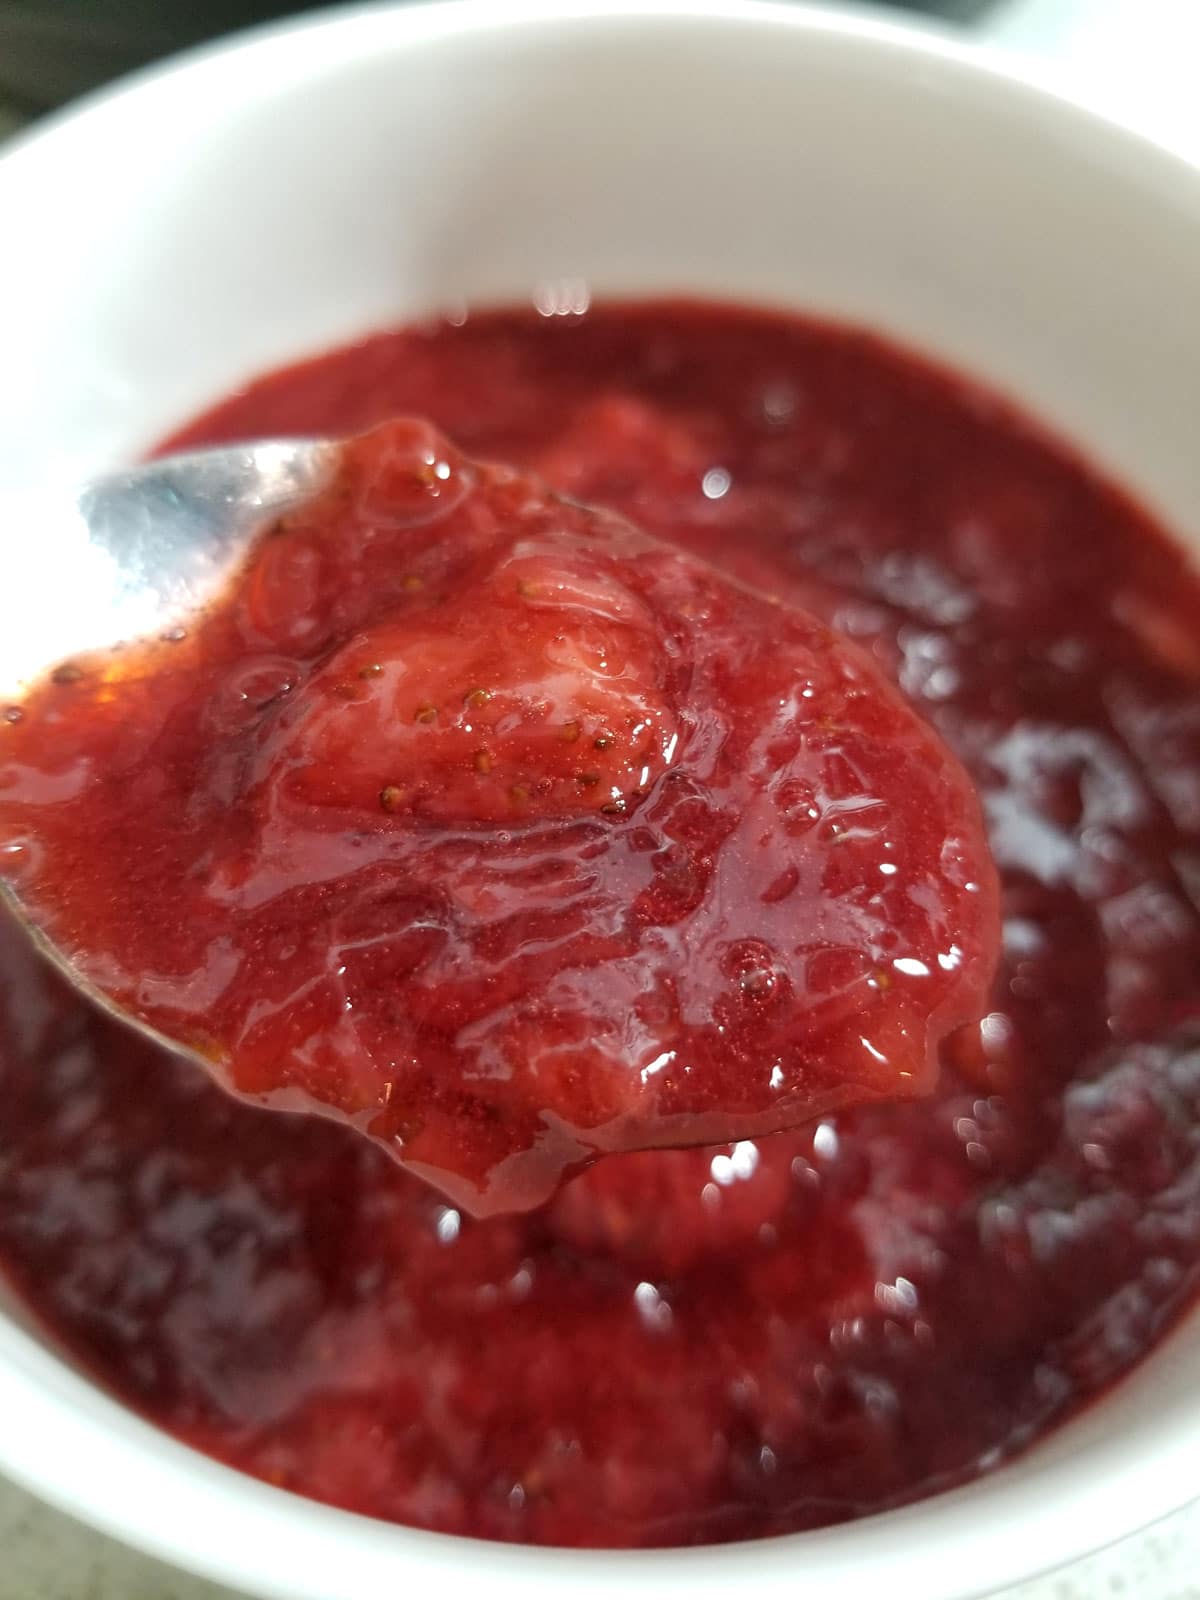 strawberry sauce for cheesecake, ice creams, pancakes, waffles